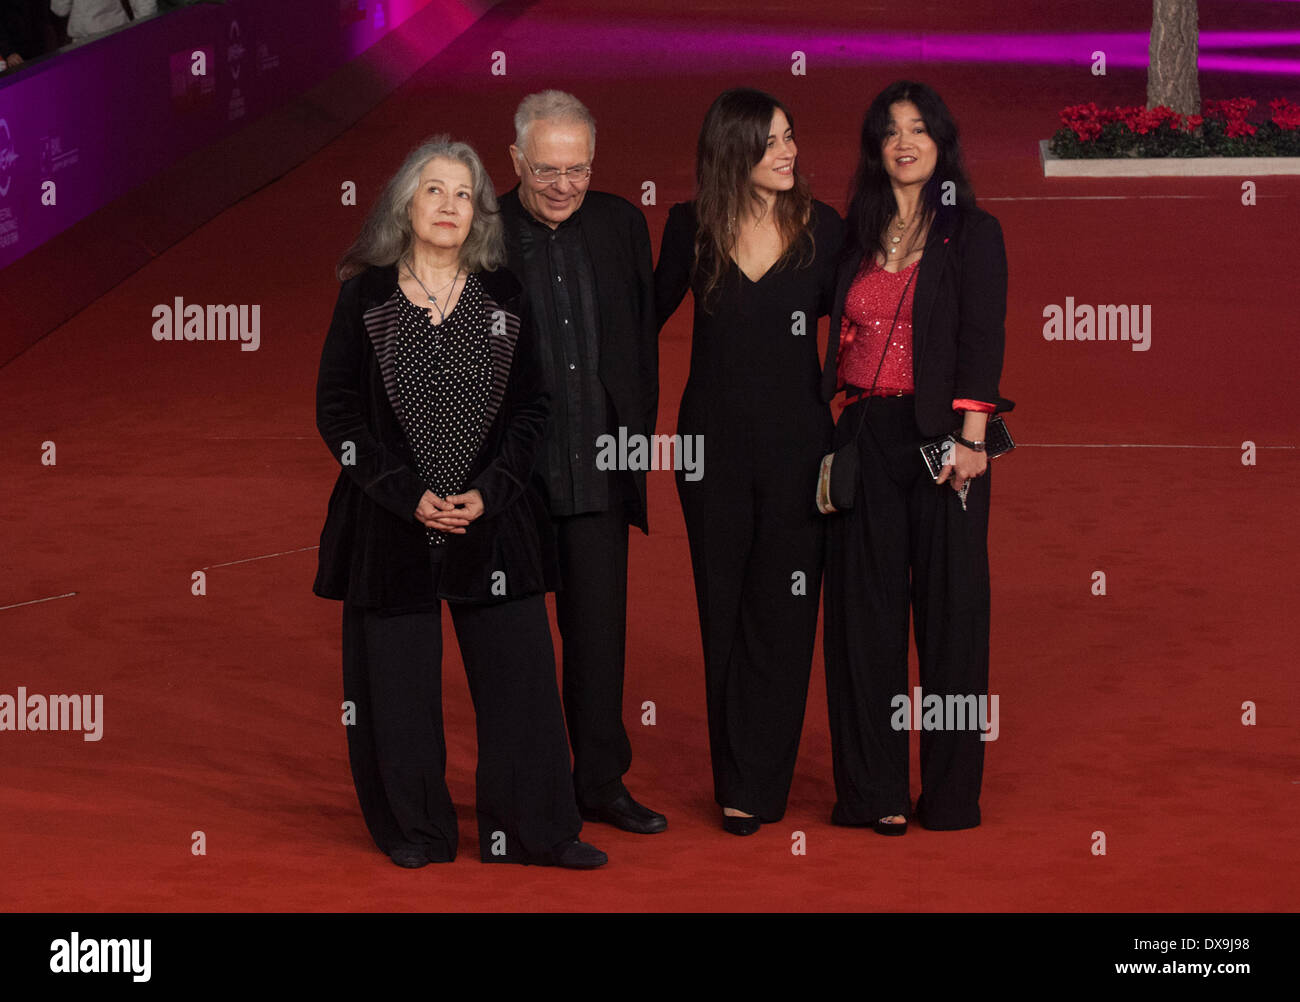 Martha Argerich, Stephen Kovacevich, Stephanie Argerich and Lyda Chen 7th Rome International Film Festival - 'Bloody Daughter' - Premiere Featuring: Martha Argerich,Stephen Kovacevich,Stephanie Argerich and Lyda Chen Where: Rome, Italy When: 16 Nov 2012 ** Stock Photo